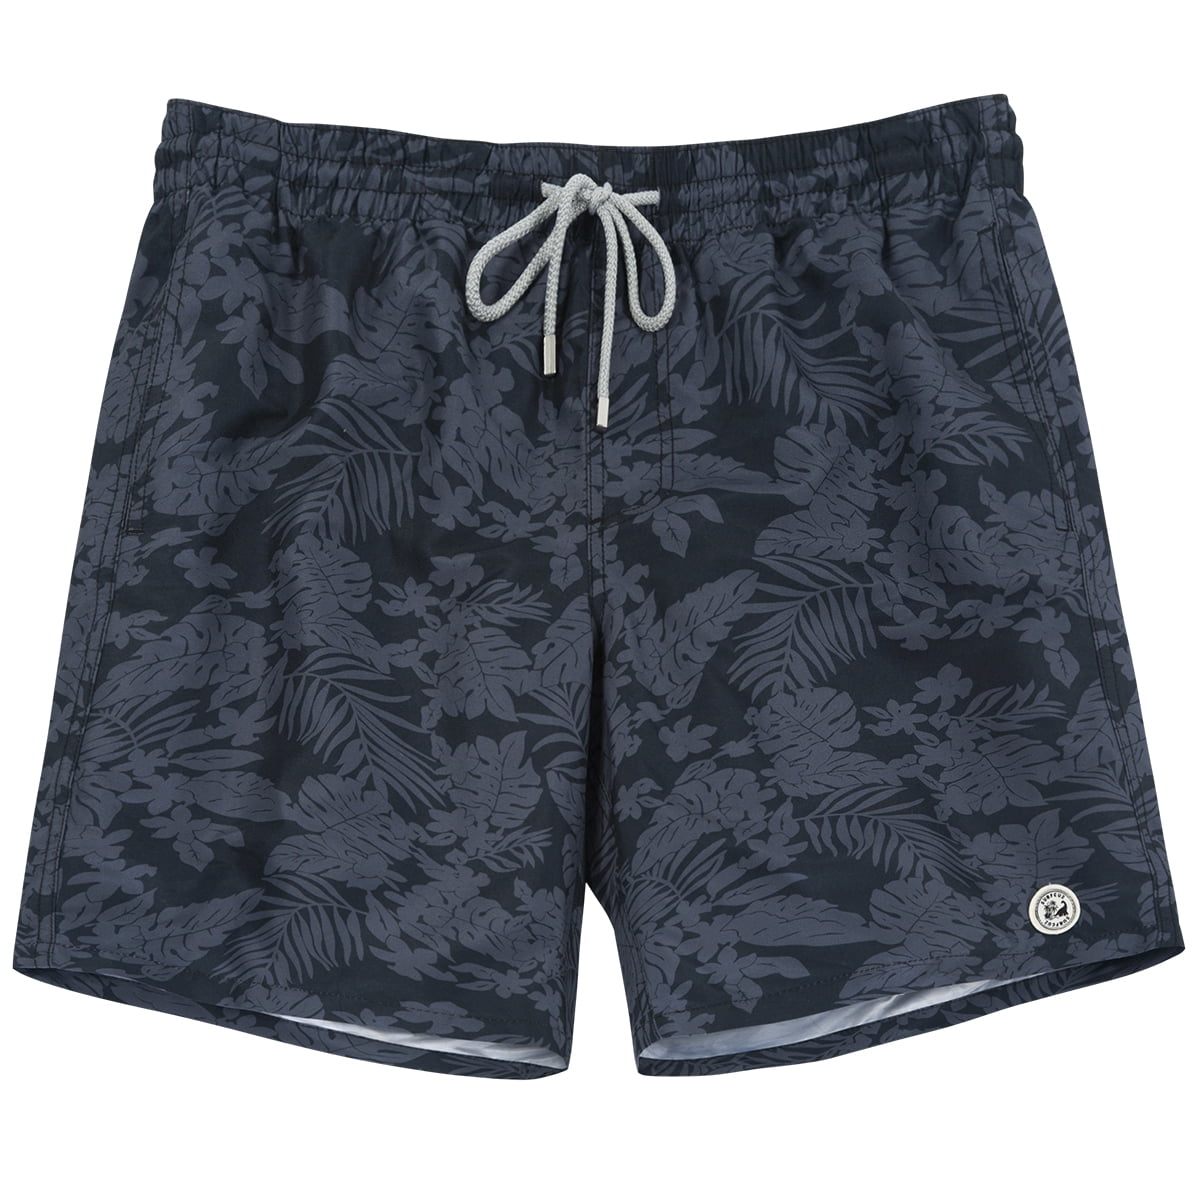 HOLIDAY FANCY DRESS NEW BLACK SHORTS BOARDERS SWIM-SHORTS WITH PIRATE SKULL 